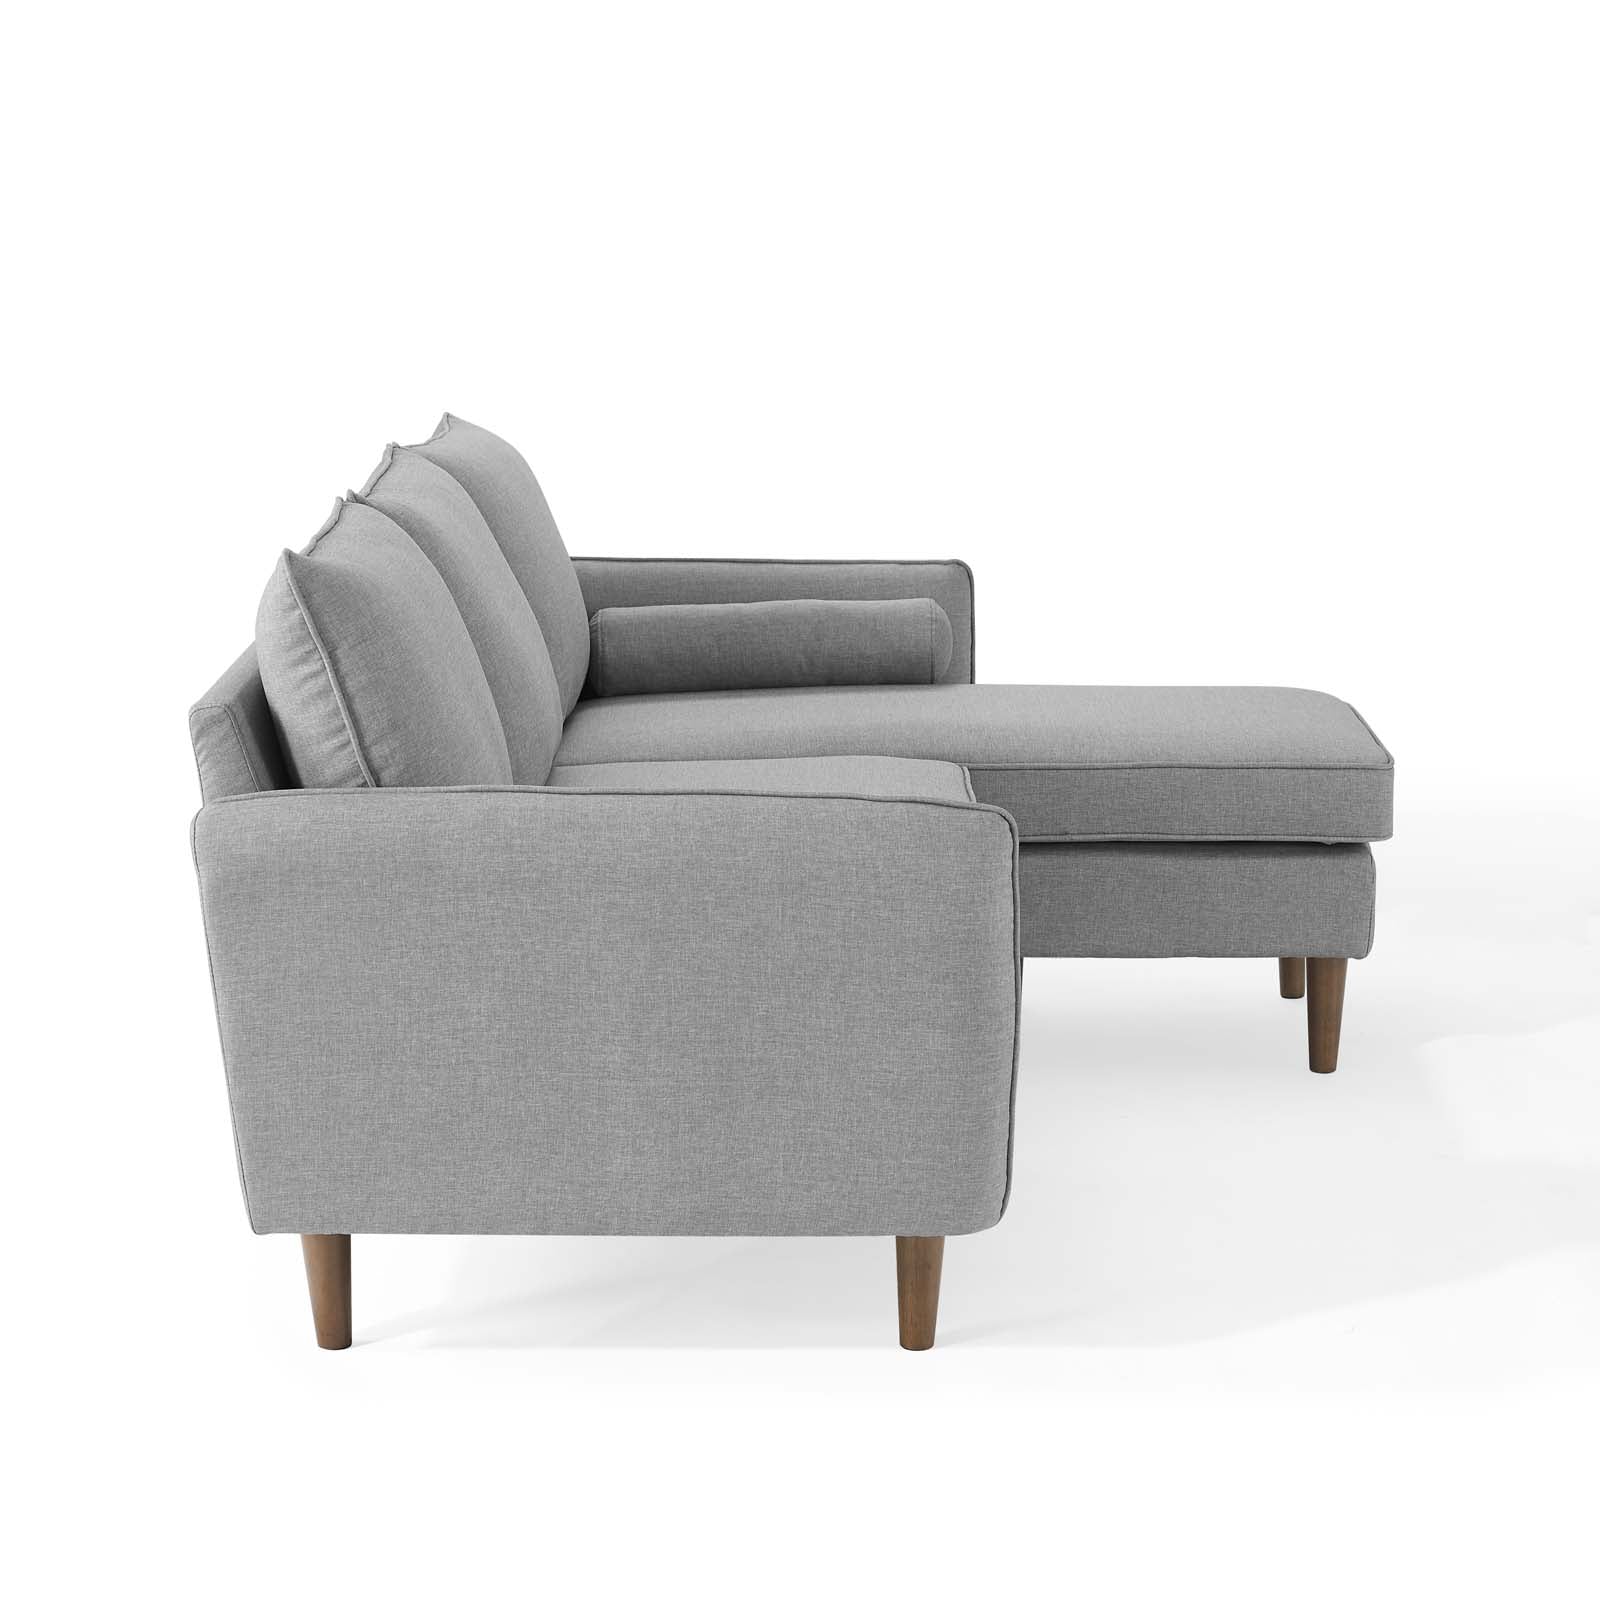 Modway Sectional Sofas - Revive Reversible Sectional Sofa Light Gray